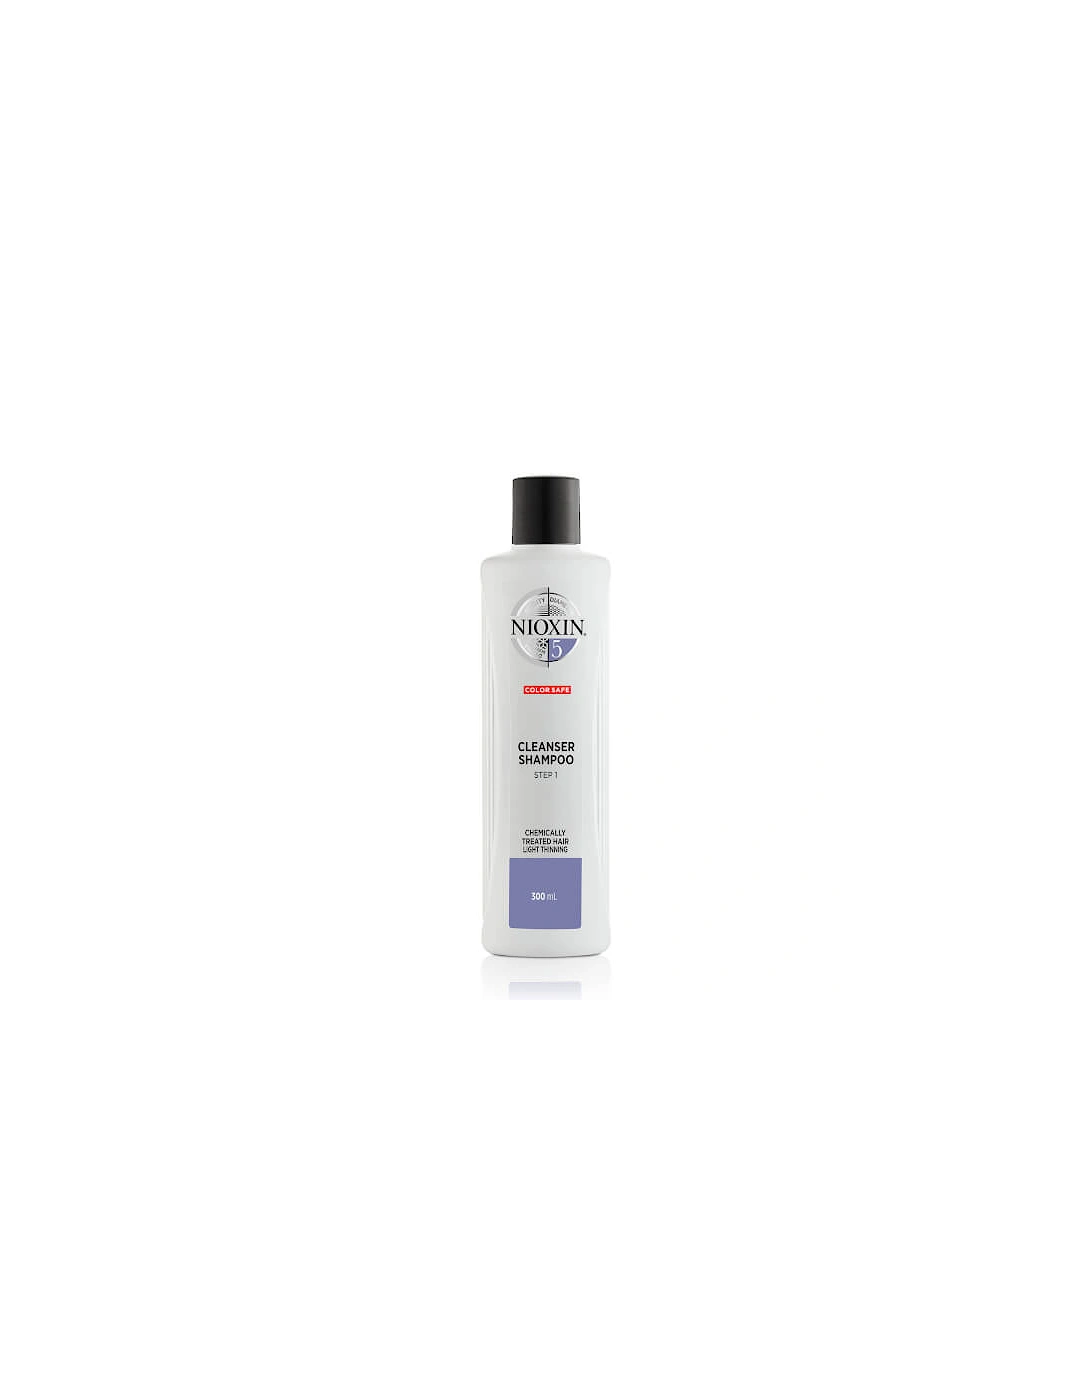 3-Part System 5 Cleanser Shampoo for Chemically Treated Hair with Light Thinning 300ml, 2 of 1